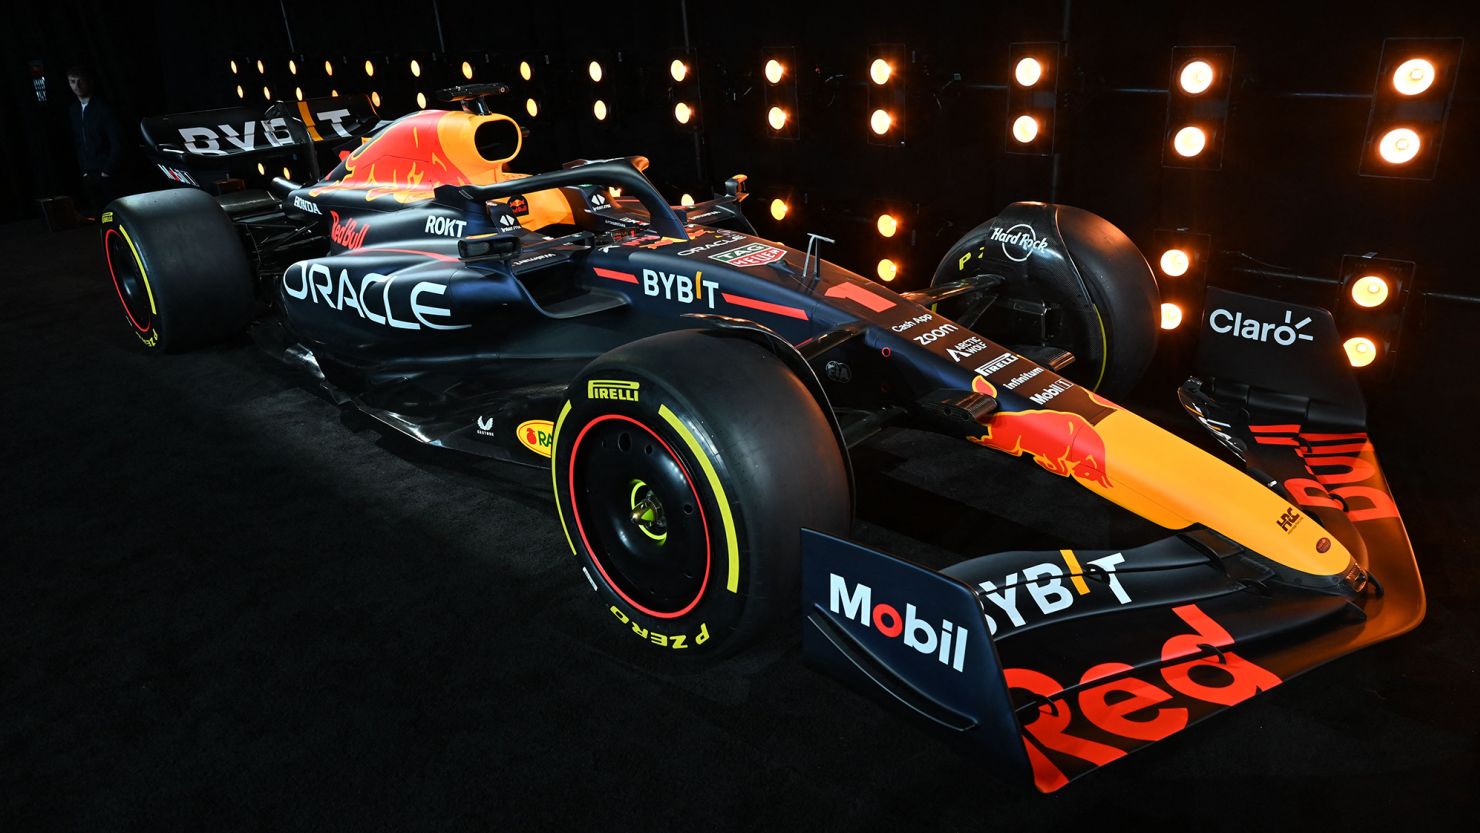 Red Bull Racing unveils the team's new Formula One car during a launch event in New York City on February 3, 2023. 